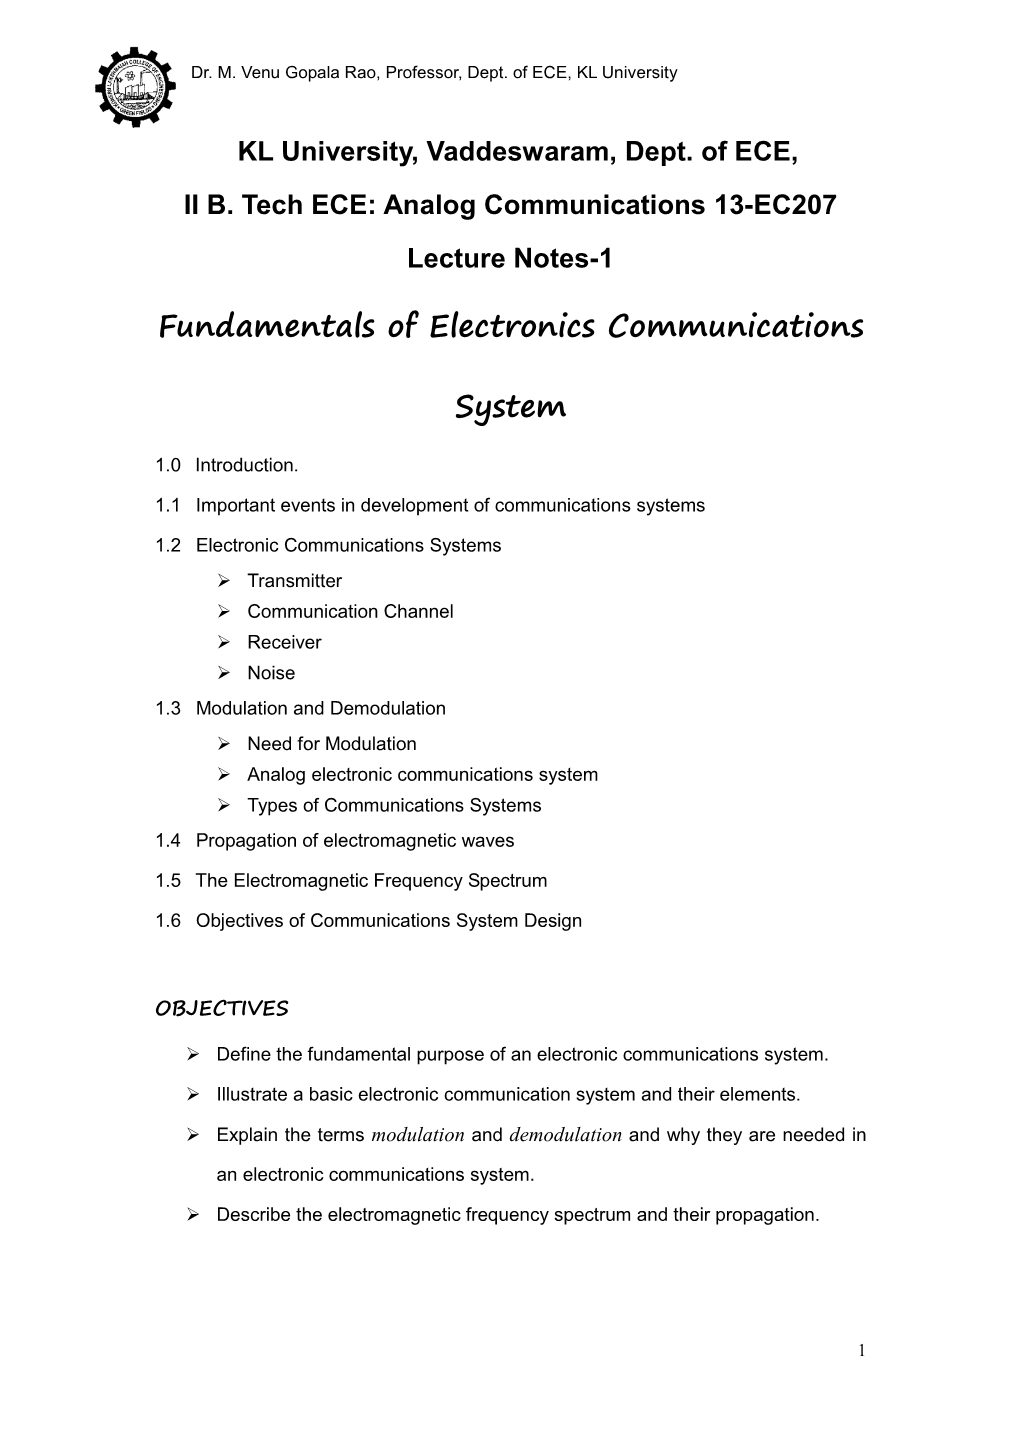 Important Events in Development of Communication Systems